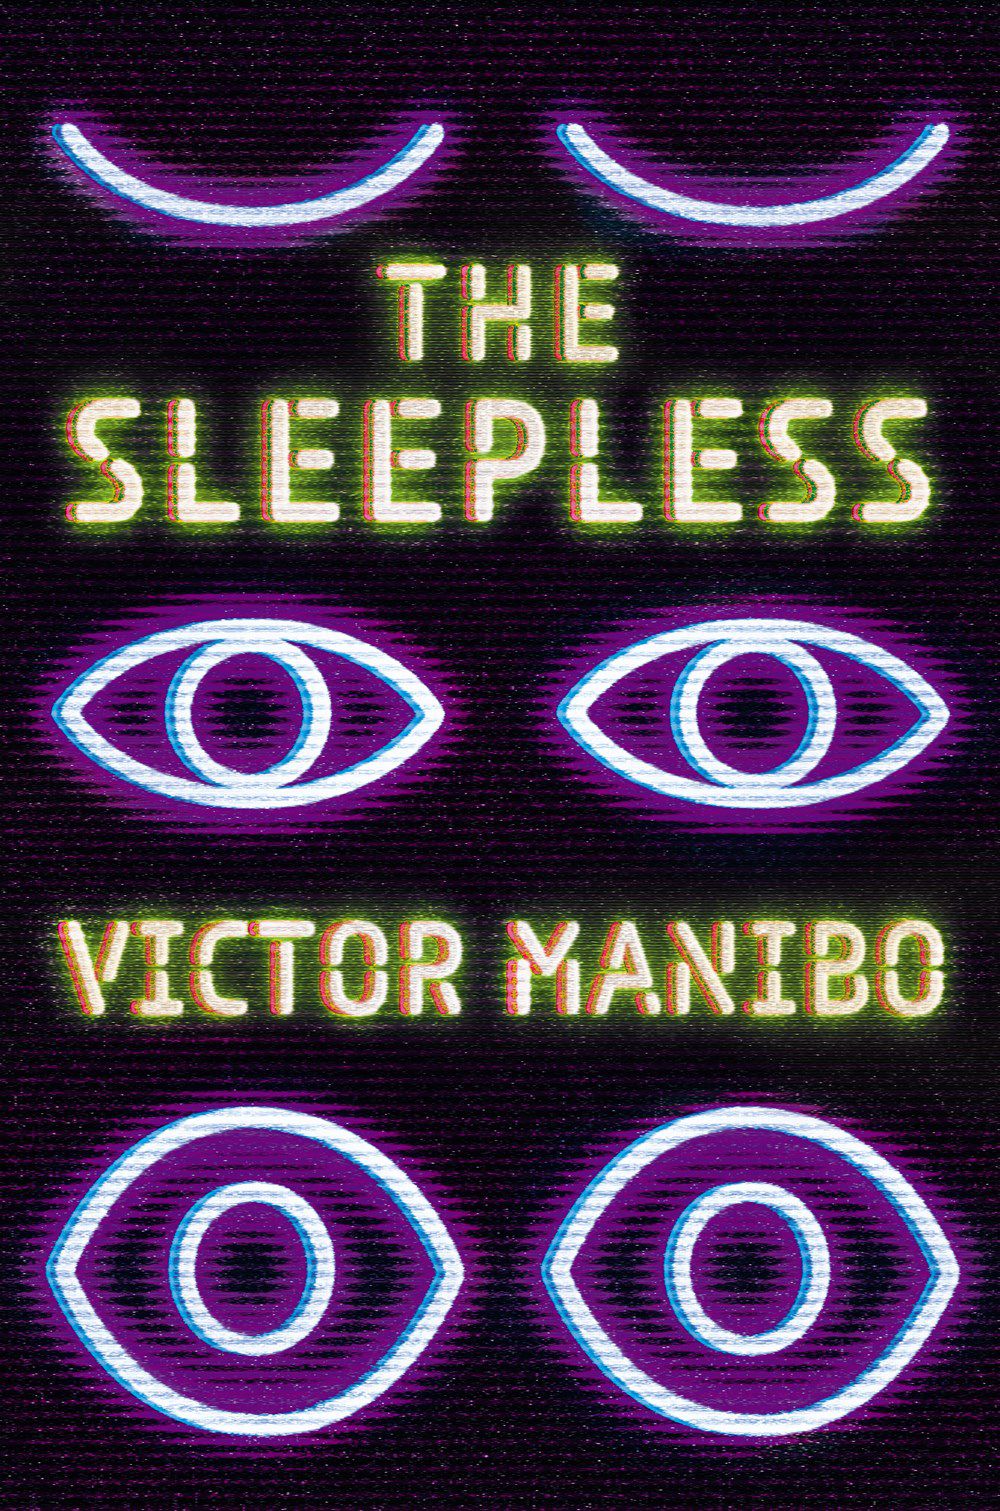 Cover photo for The Sleepless by Victor Manibo, which shows three pairs of eyes in neon lights that open gradually.